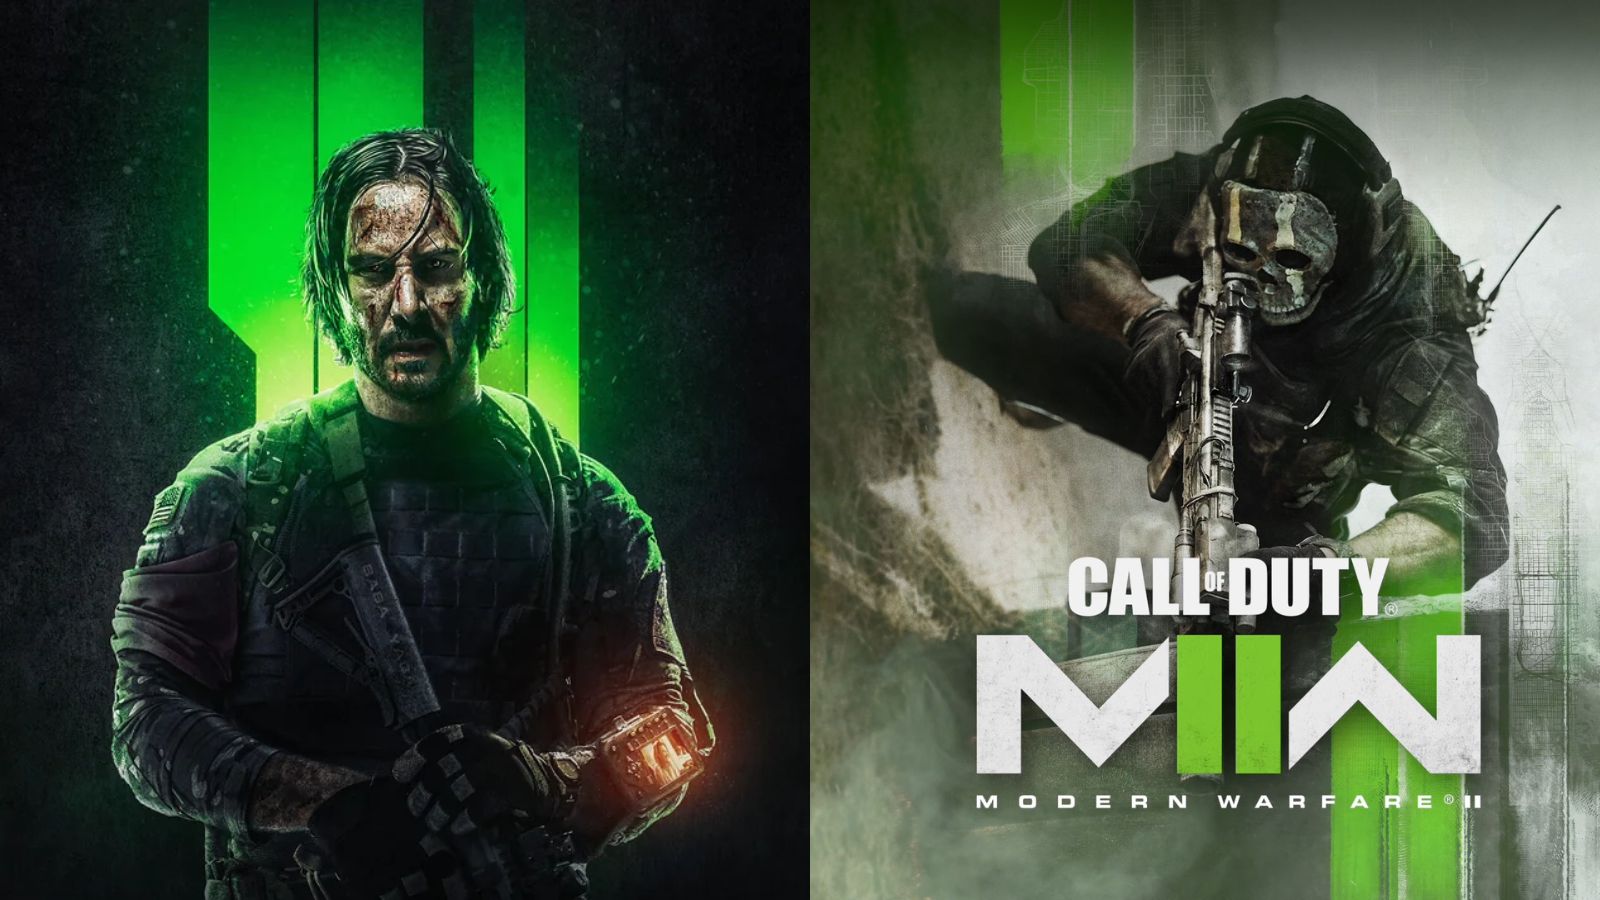 MW2 players call for John Wick operator skin: “Why is this not a thing yet” – Dexerto